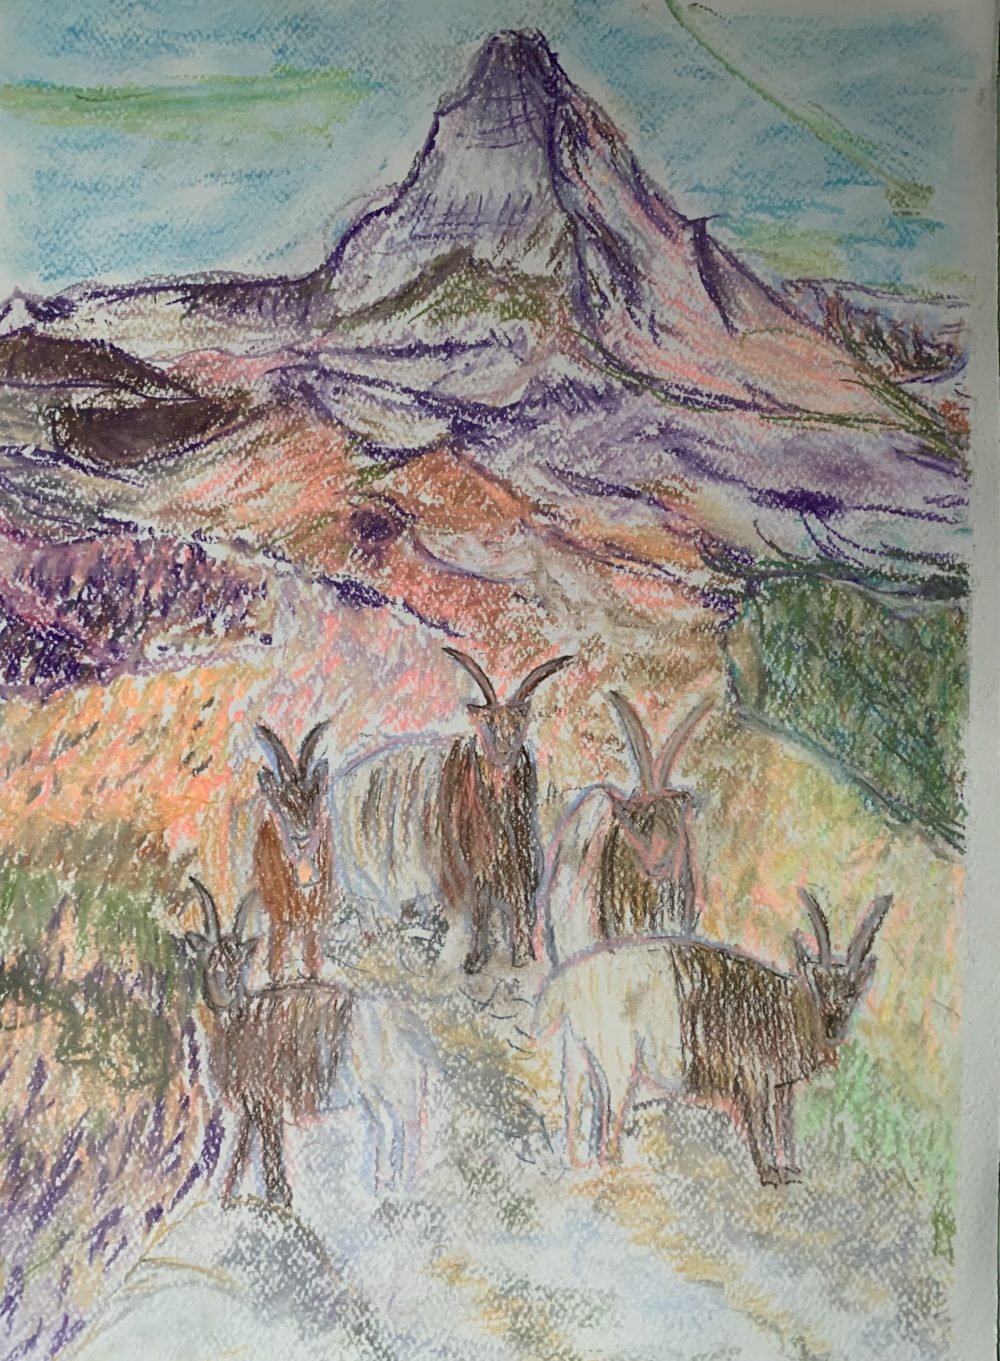 Some alpine ibex posing in front of the Matterhorn. pastels.